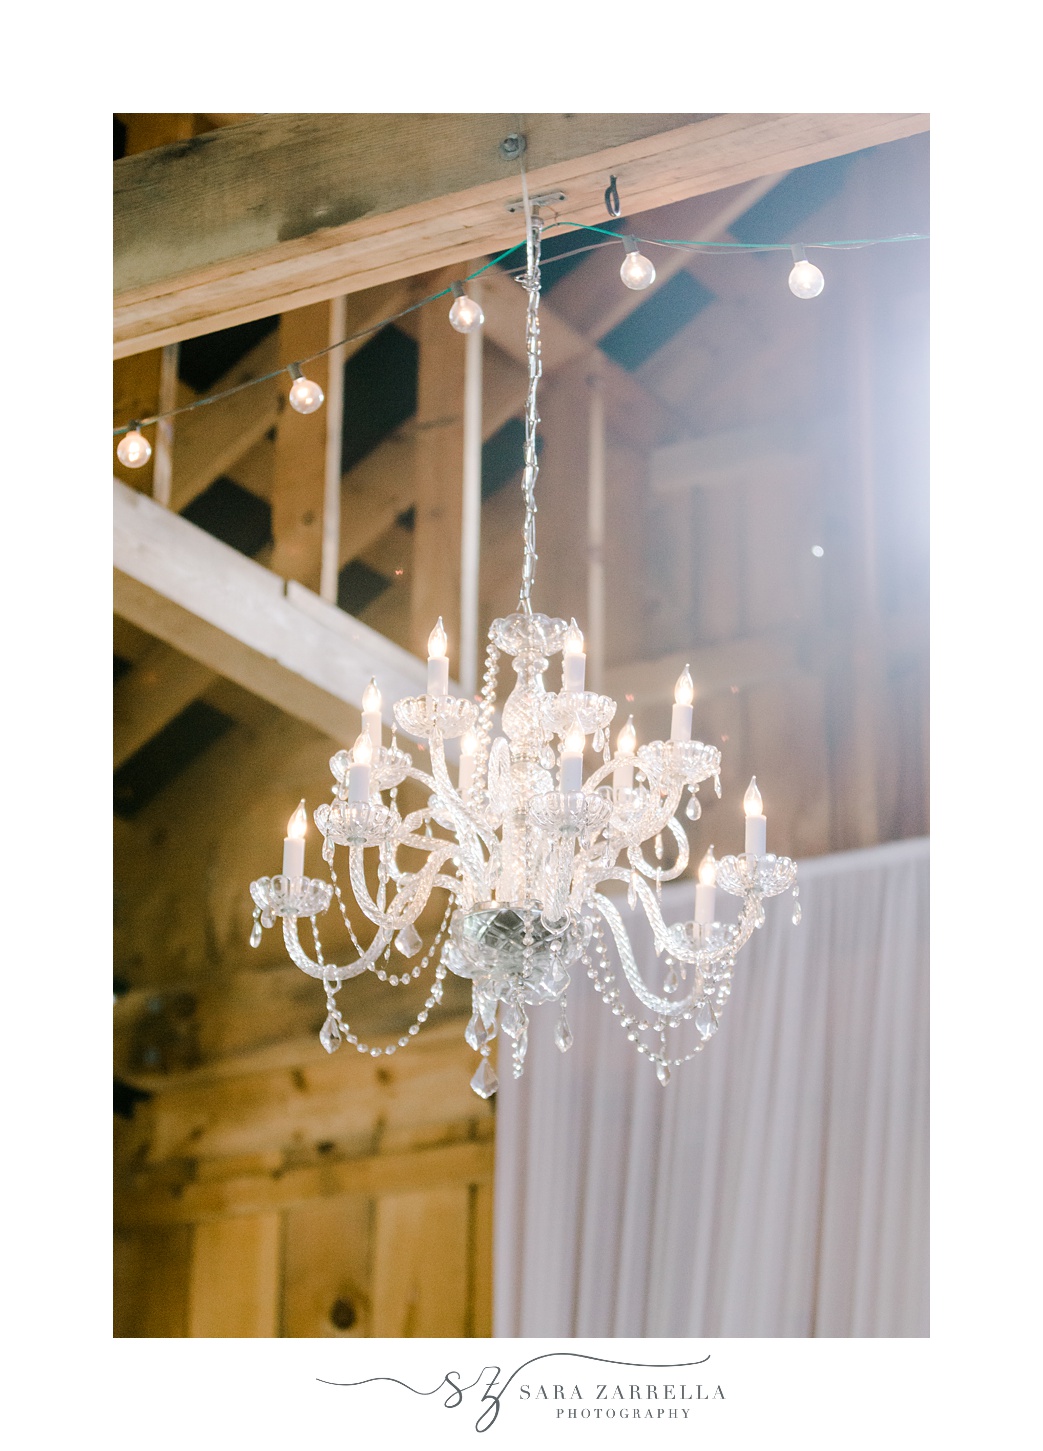 chandelier hangs from roof for wedding reception in the Pavilion at Blissful Meadows